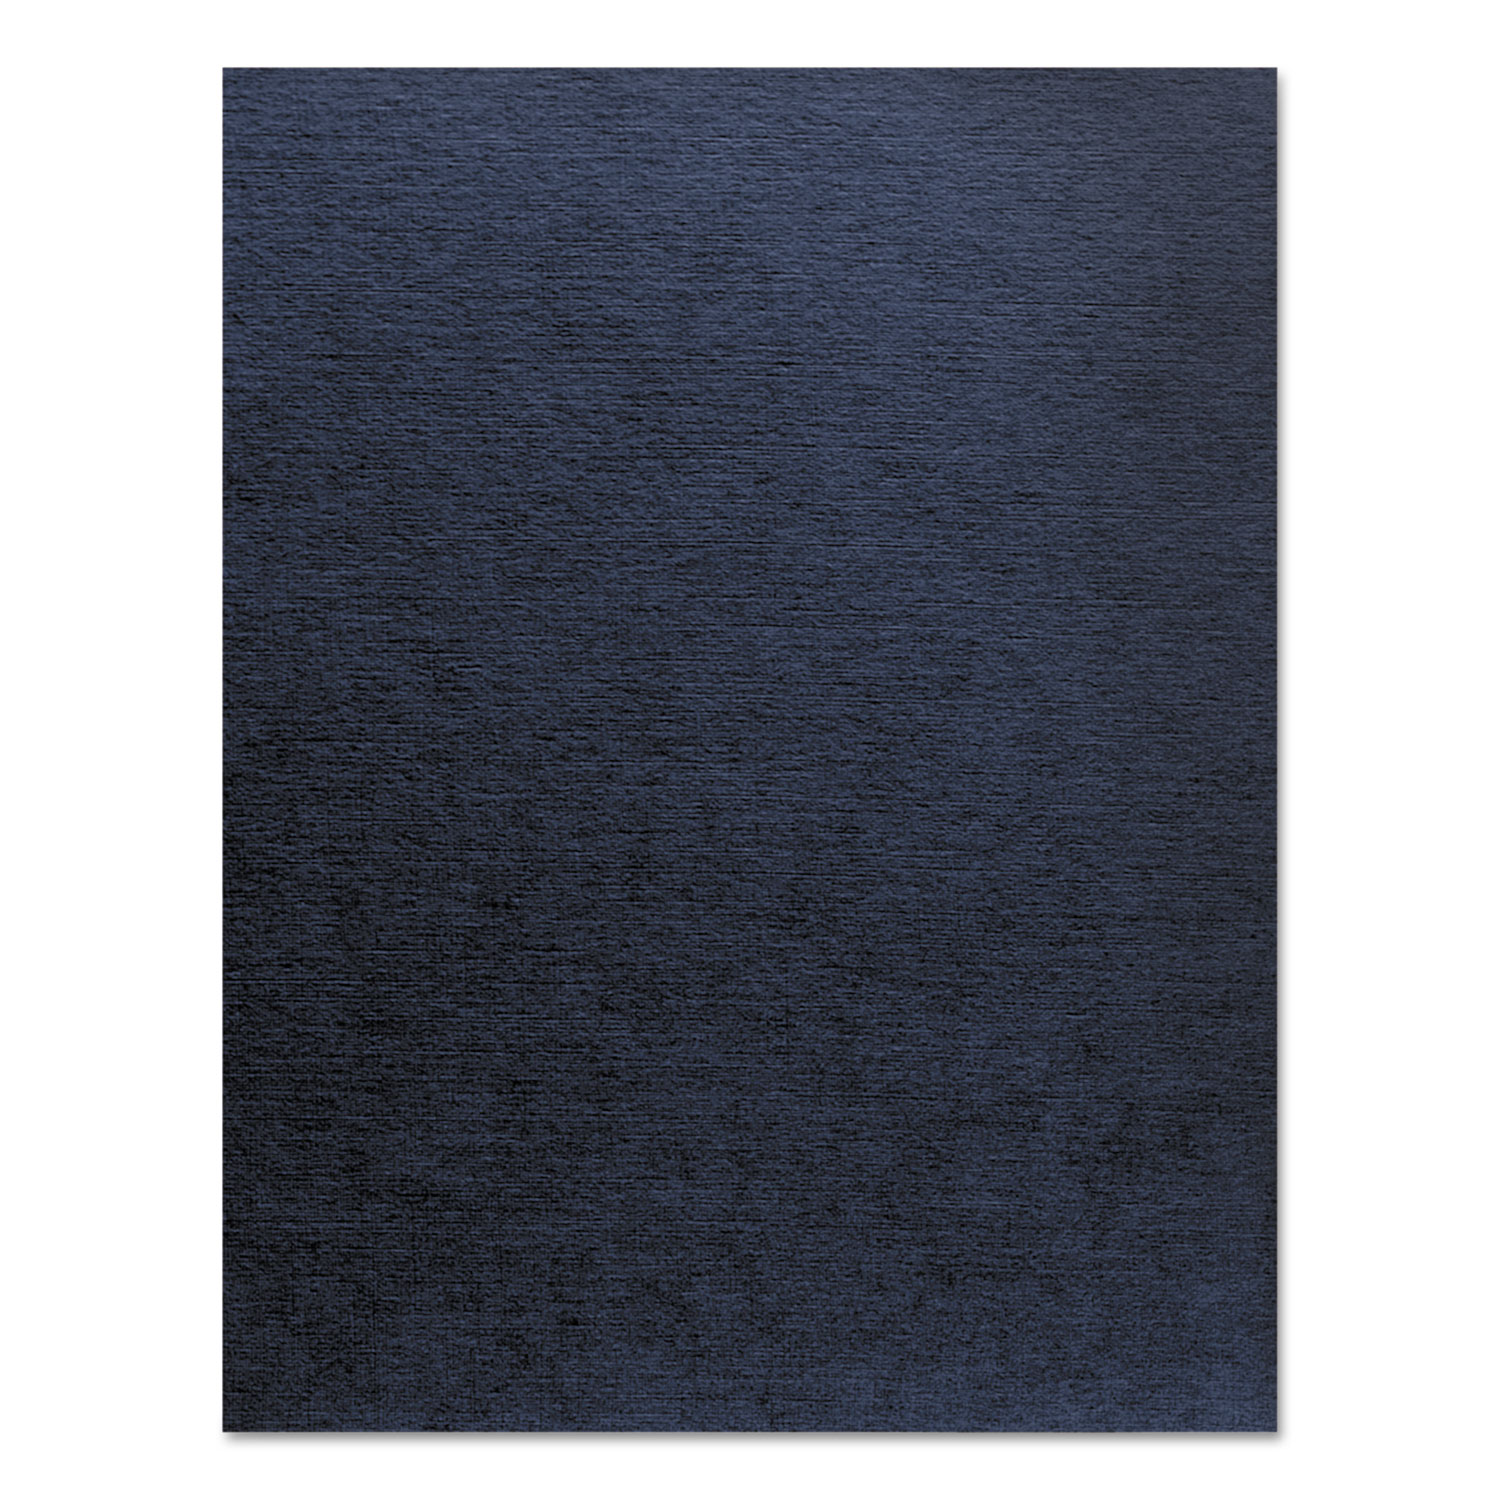  Fellowes 52098 Linen Texture Binding System Covers, 11 x 8-1/2, Navy, 200/Pack (FEL52098) 